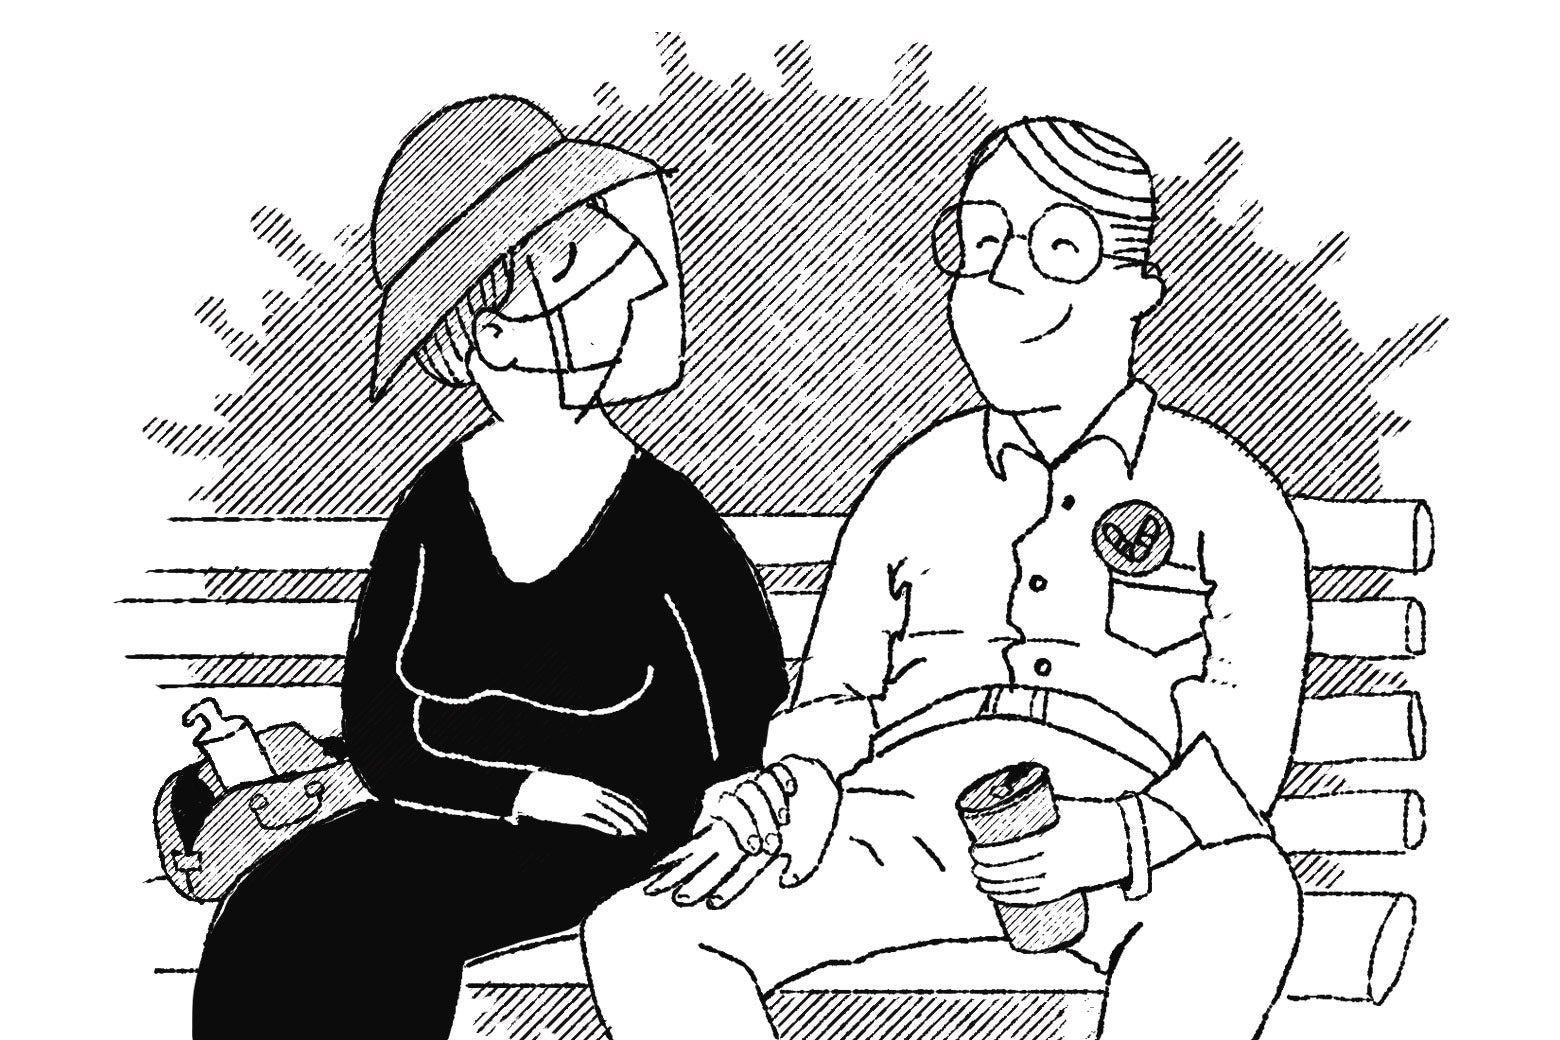 A couple sitting on a park bench, the woman still in full protective gear as the man basks in the sun without a mask, drinking a soda. 